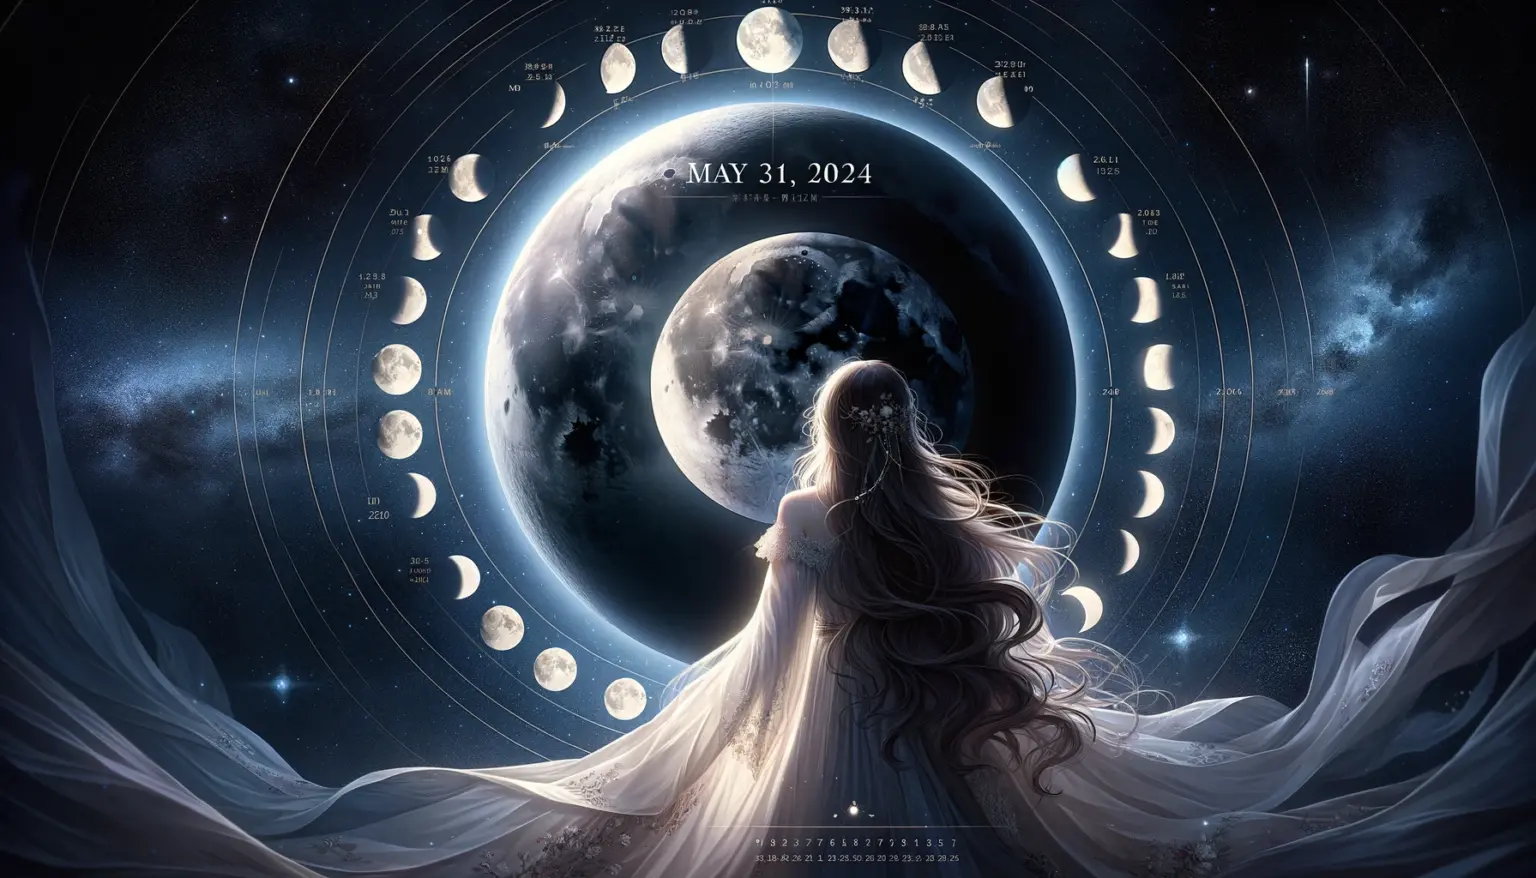 Moon Matters: May 31, 2024 - Your Guide to Lunar Insights